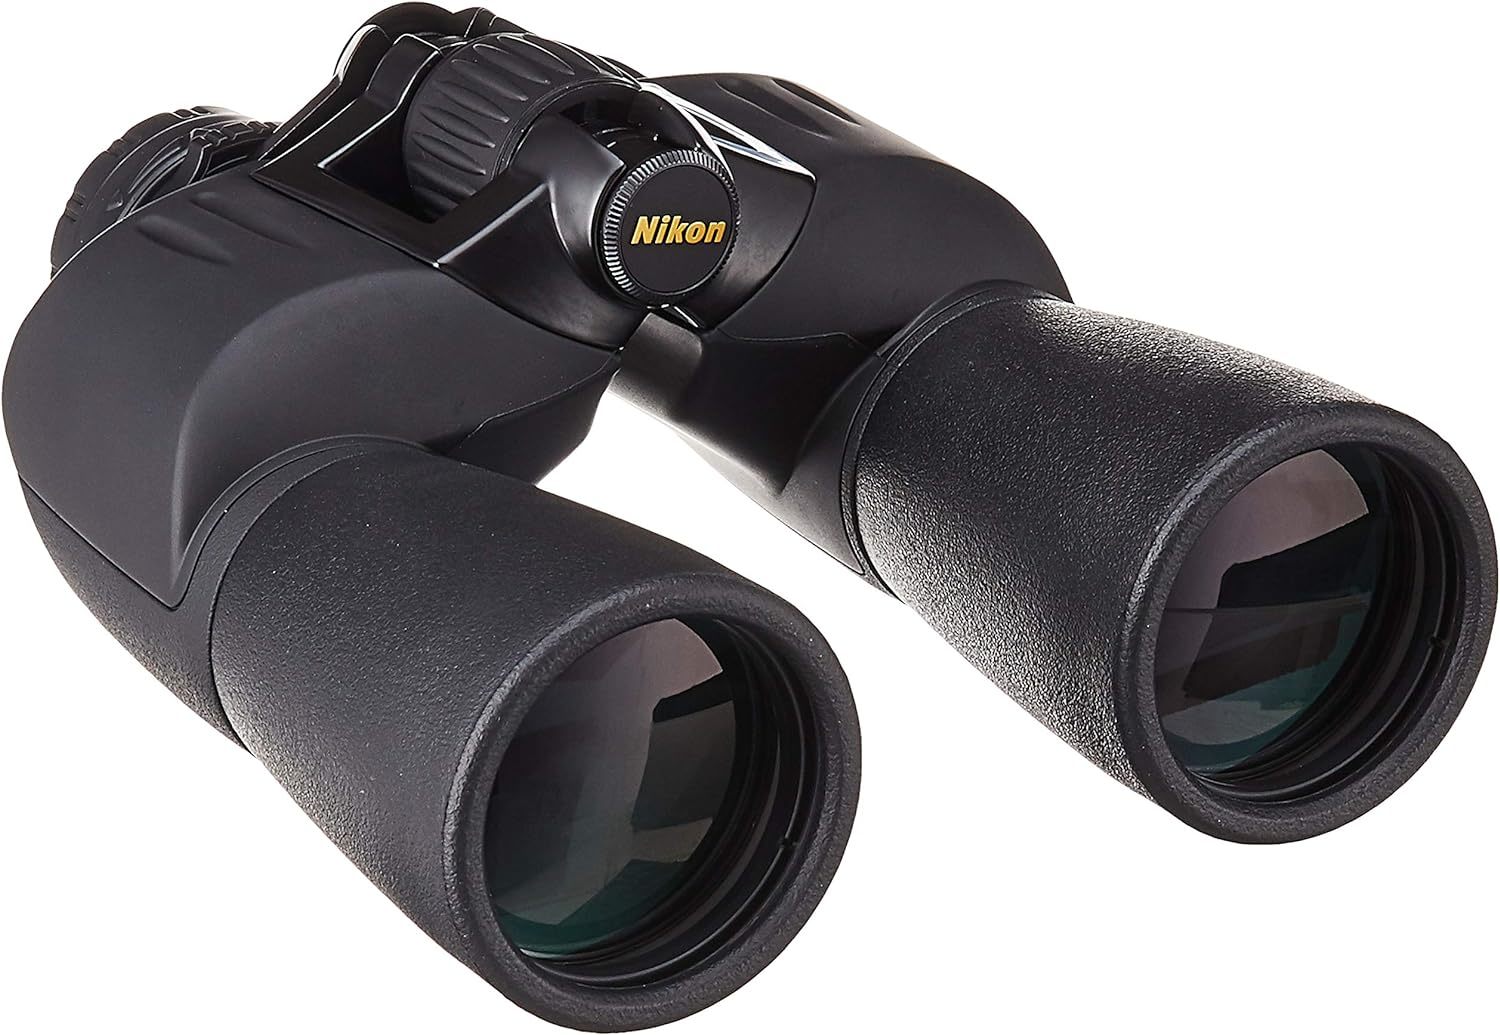 Primary image for Extreme All-Terrain Binoculars, Nikon 7245 Action 10X50 Ex.